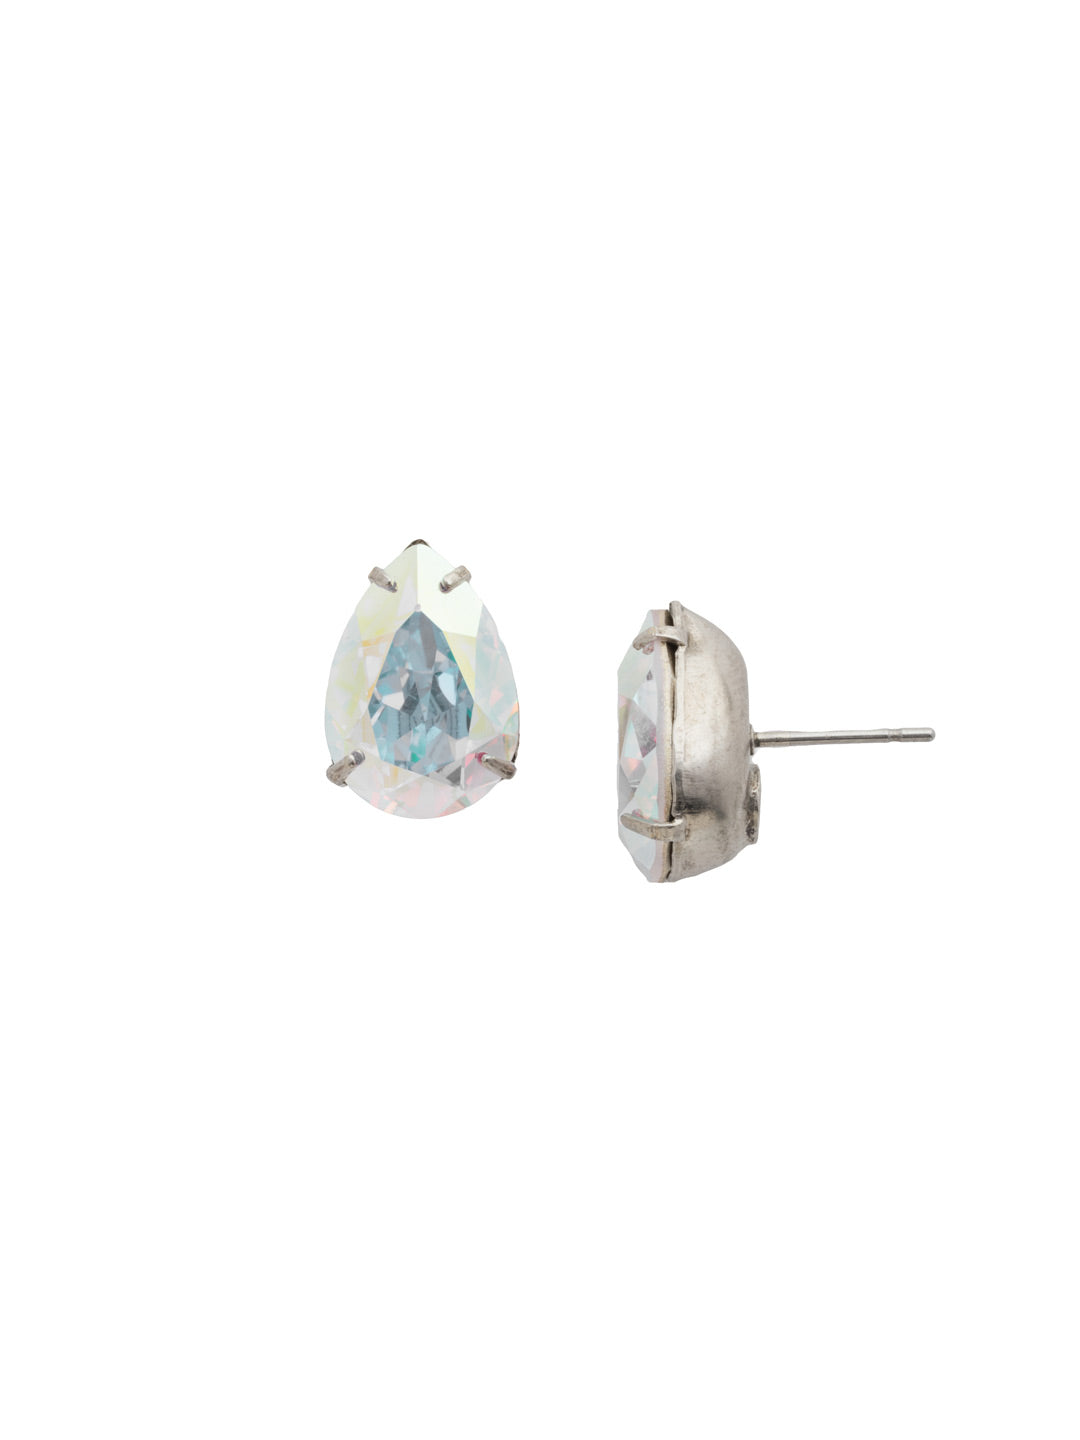 Ginnie Stud Earrings - ECR115ASWBR - <p>A beautiful basic stud. These classic single teardrop post earrings are perfect for any occasion, especially the everyday look. A timeless treasure that will sparkle season after season. From Sorrelli's White Bridal collection in our Antique Silver-tone finish.</p>